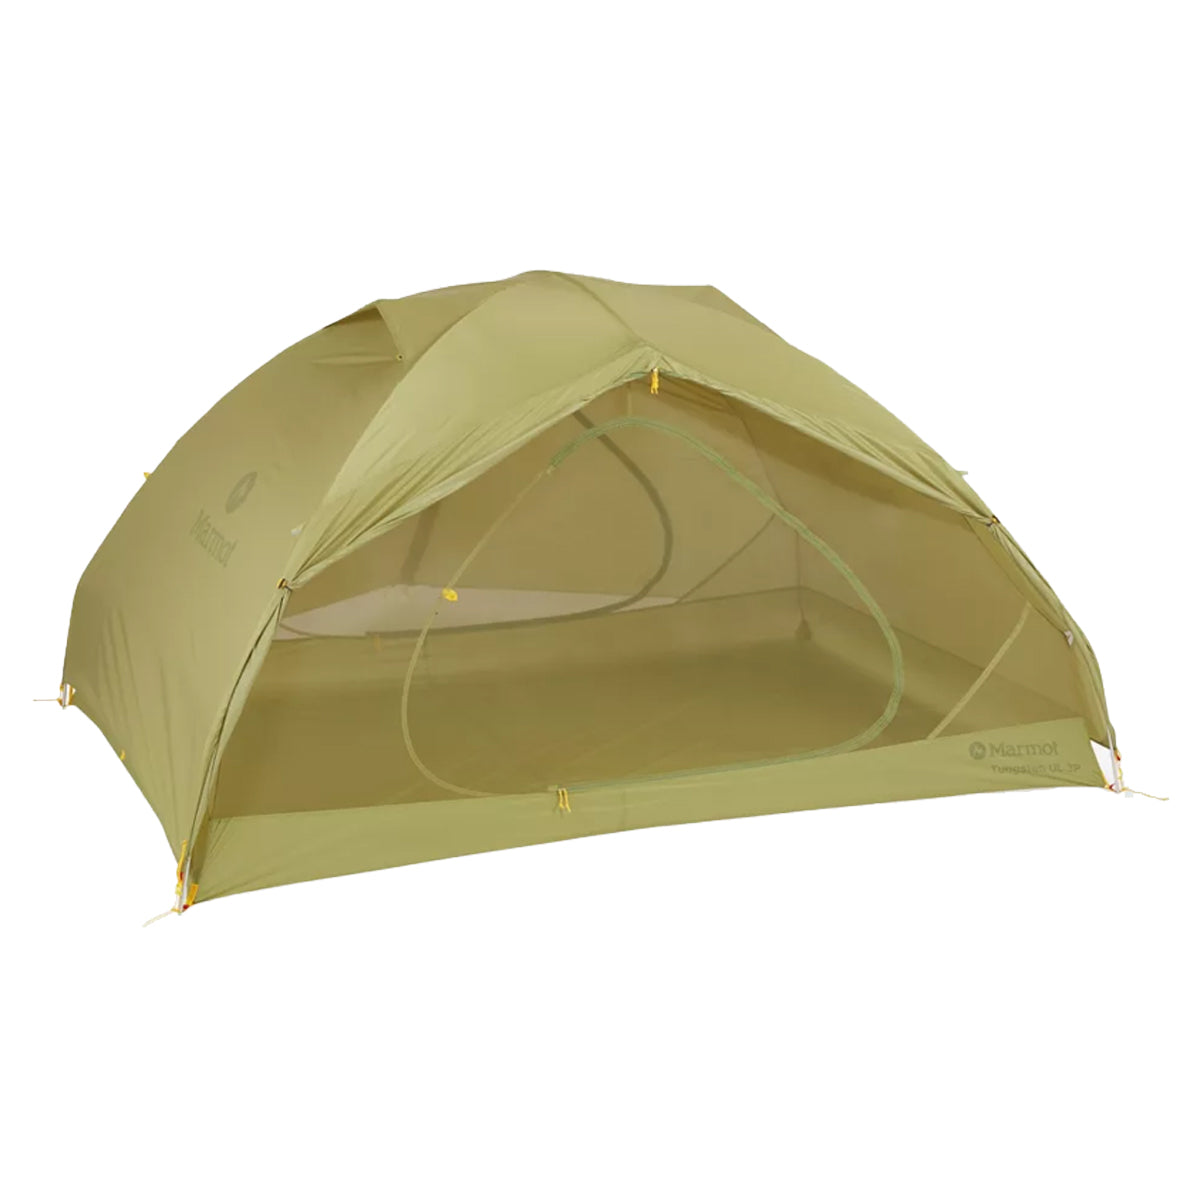 Marmot Tungsten UL 3 Person Tent in  by GOHUNT | Marmot - GOHUNT Shop